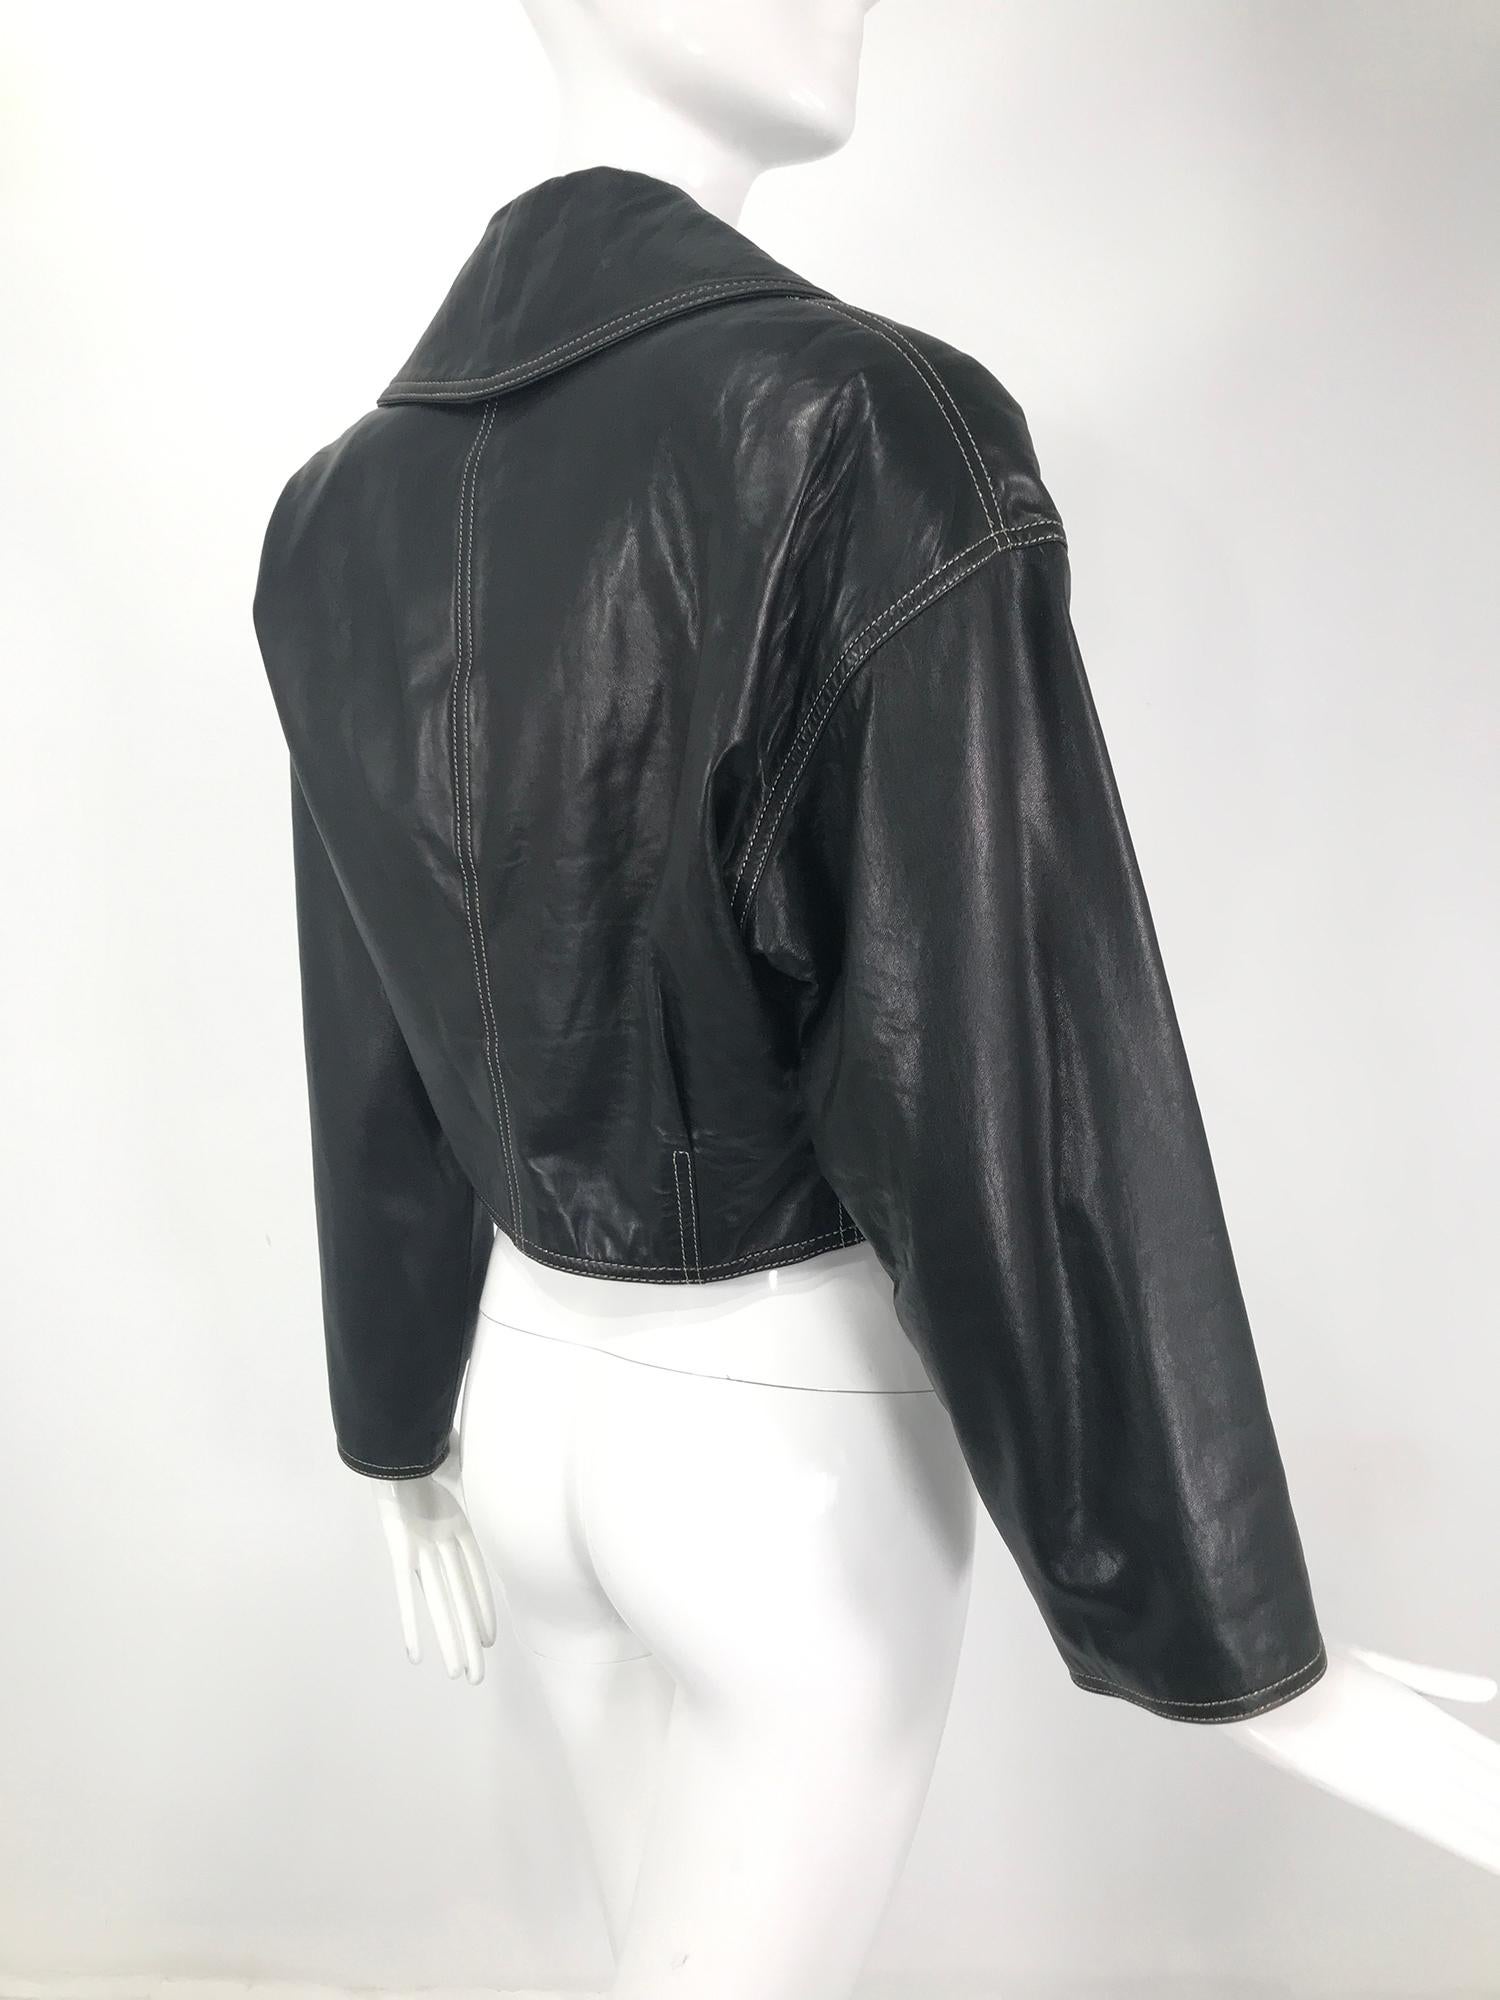 Genny Black Leather Bomber Jacket With Rhinestone Buttons & Gold Stitching 1980s 3